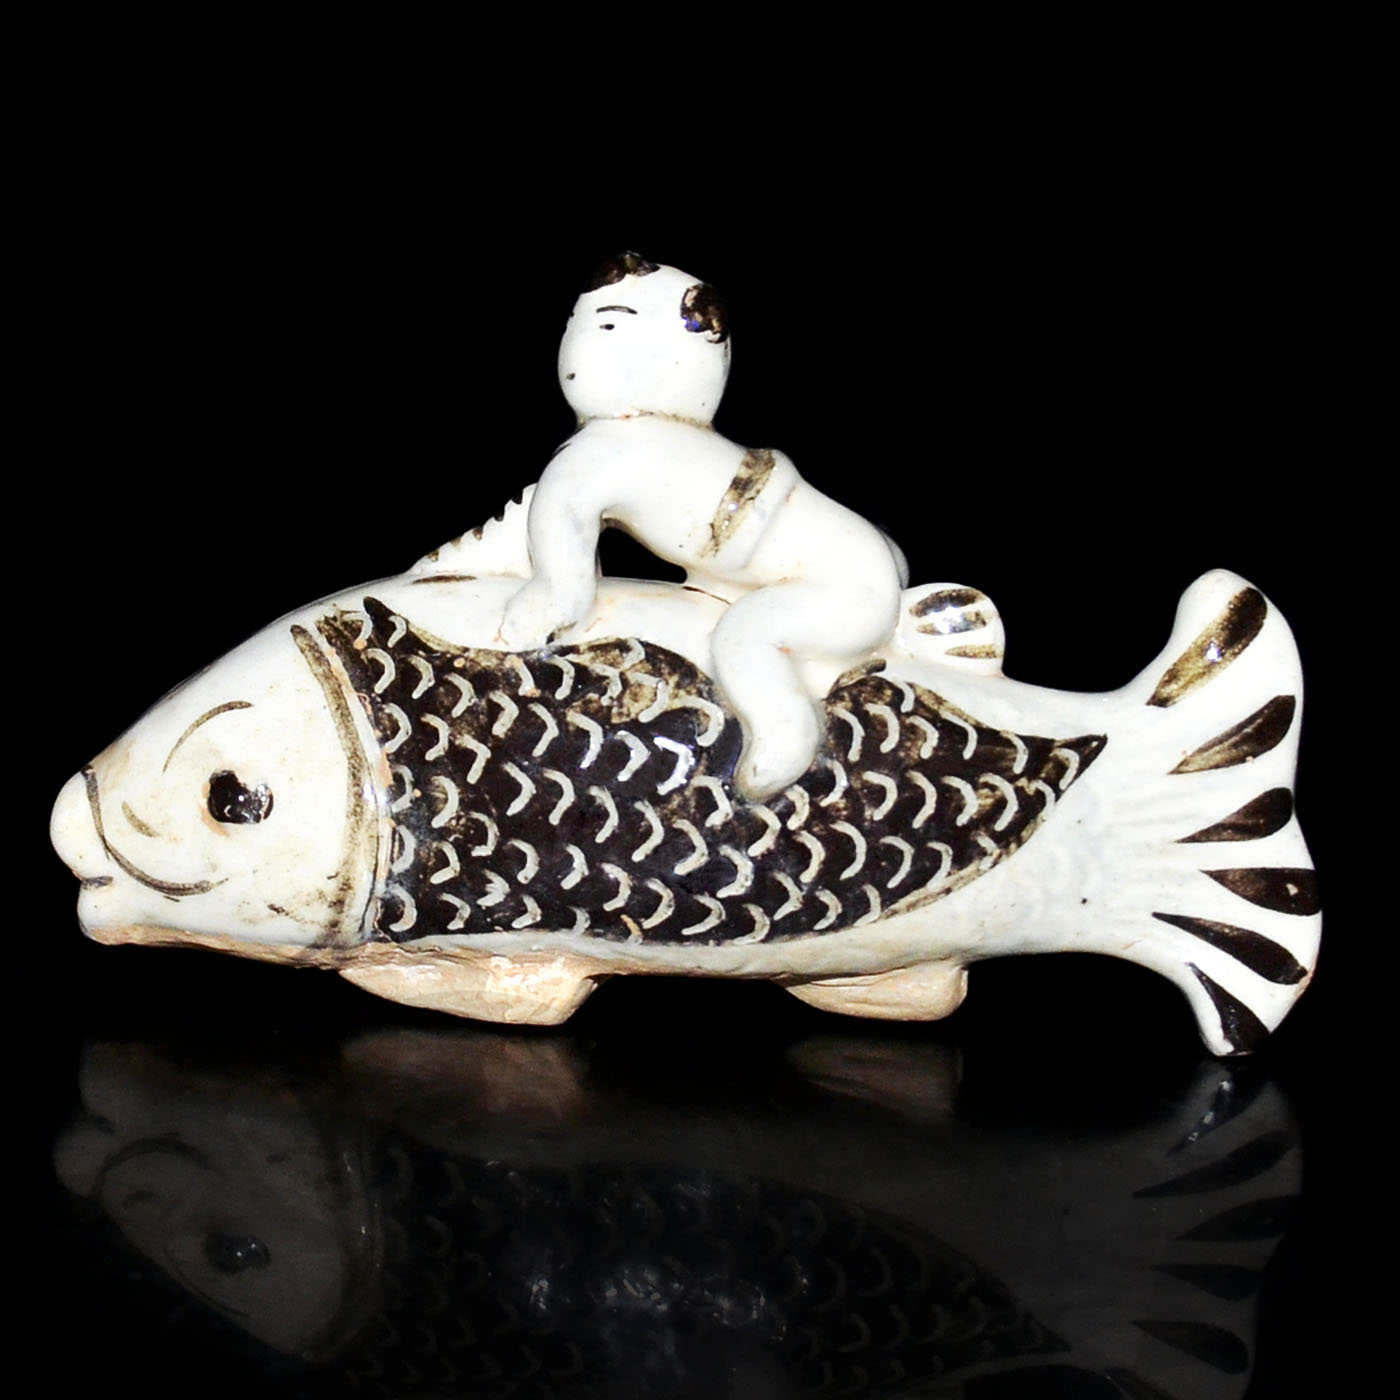 Boy riding a fish, one of the classical ceramic bargains in Gianguan Auctions' December 10 sale.